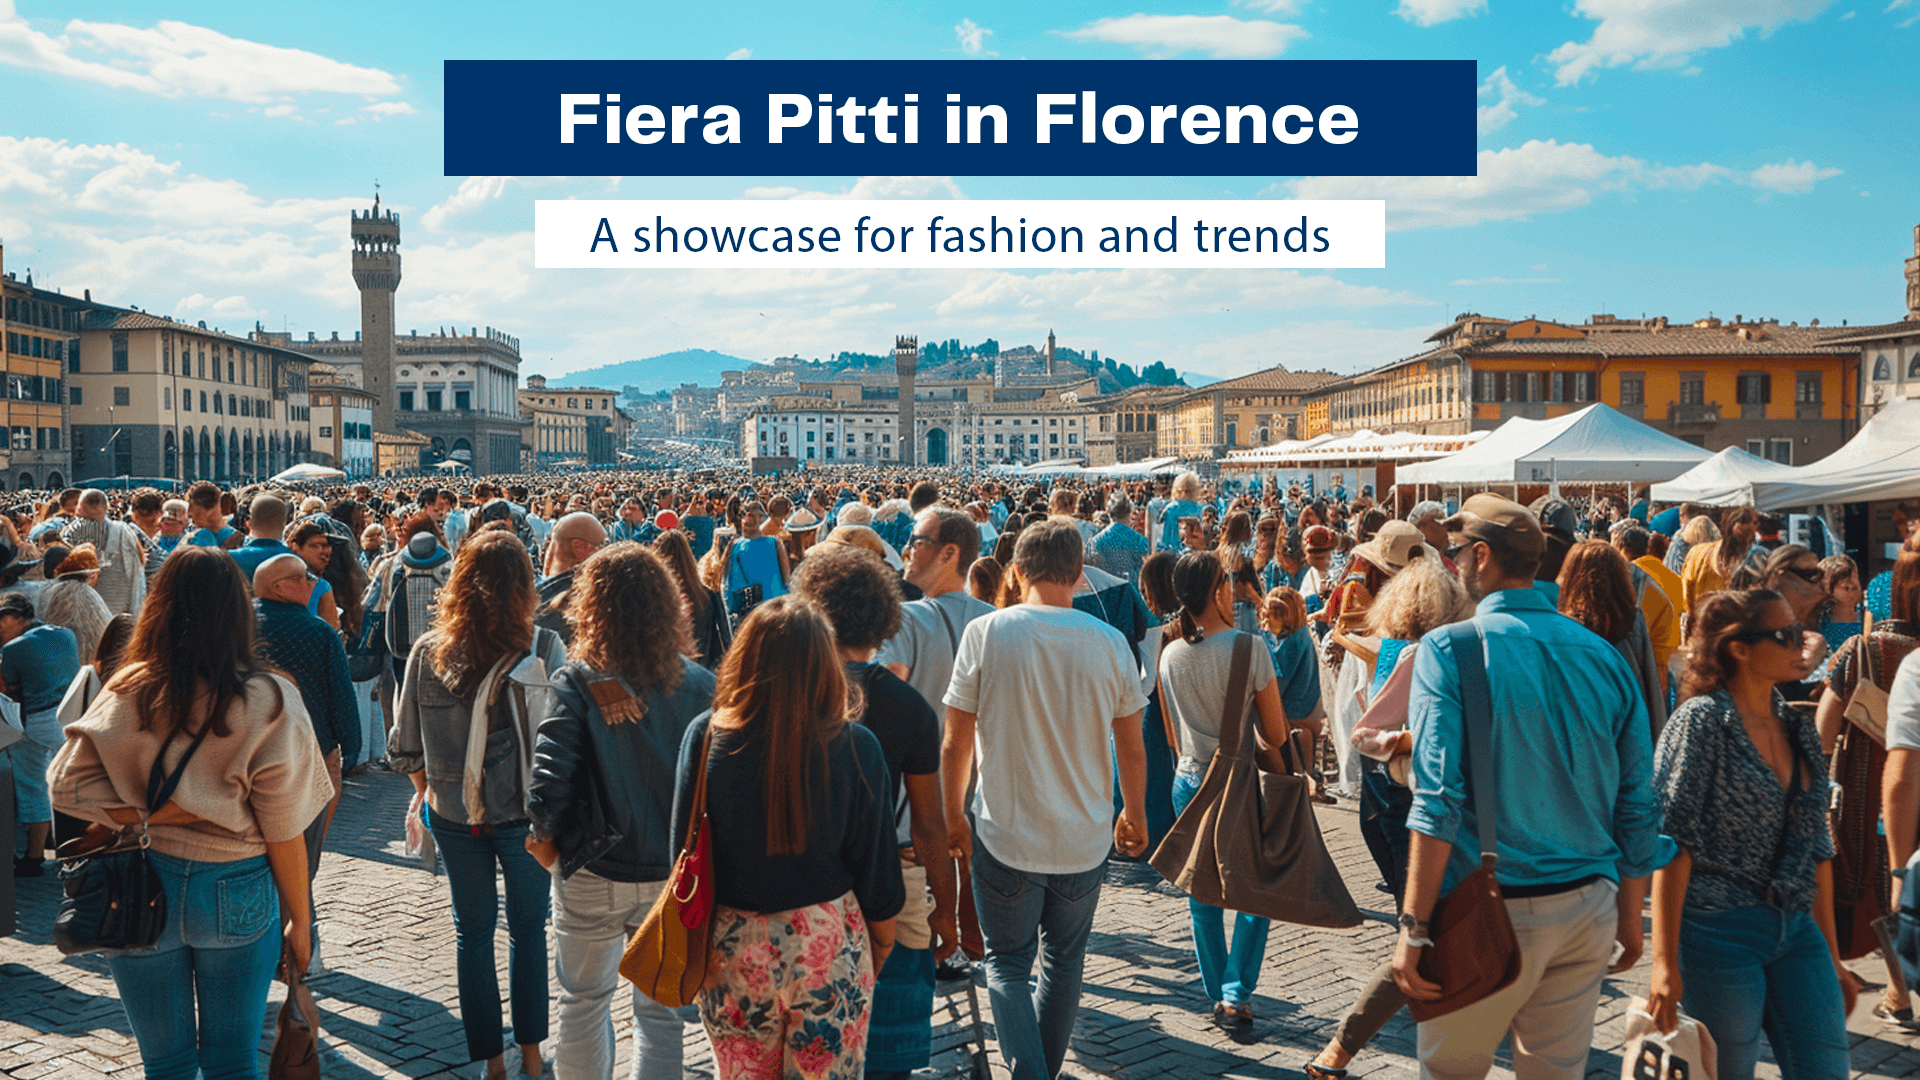 Fiera Pitti in Florence: A showcase for fashion and trends